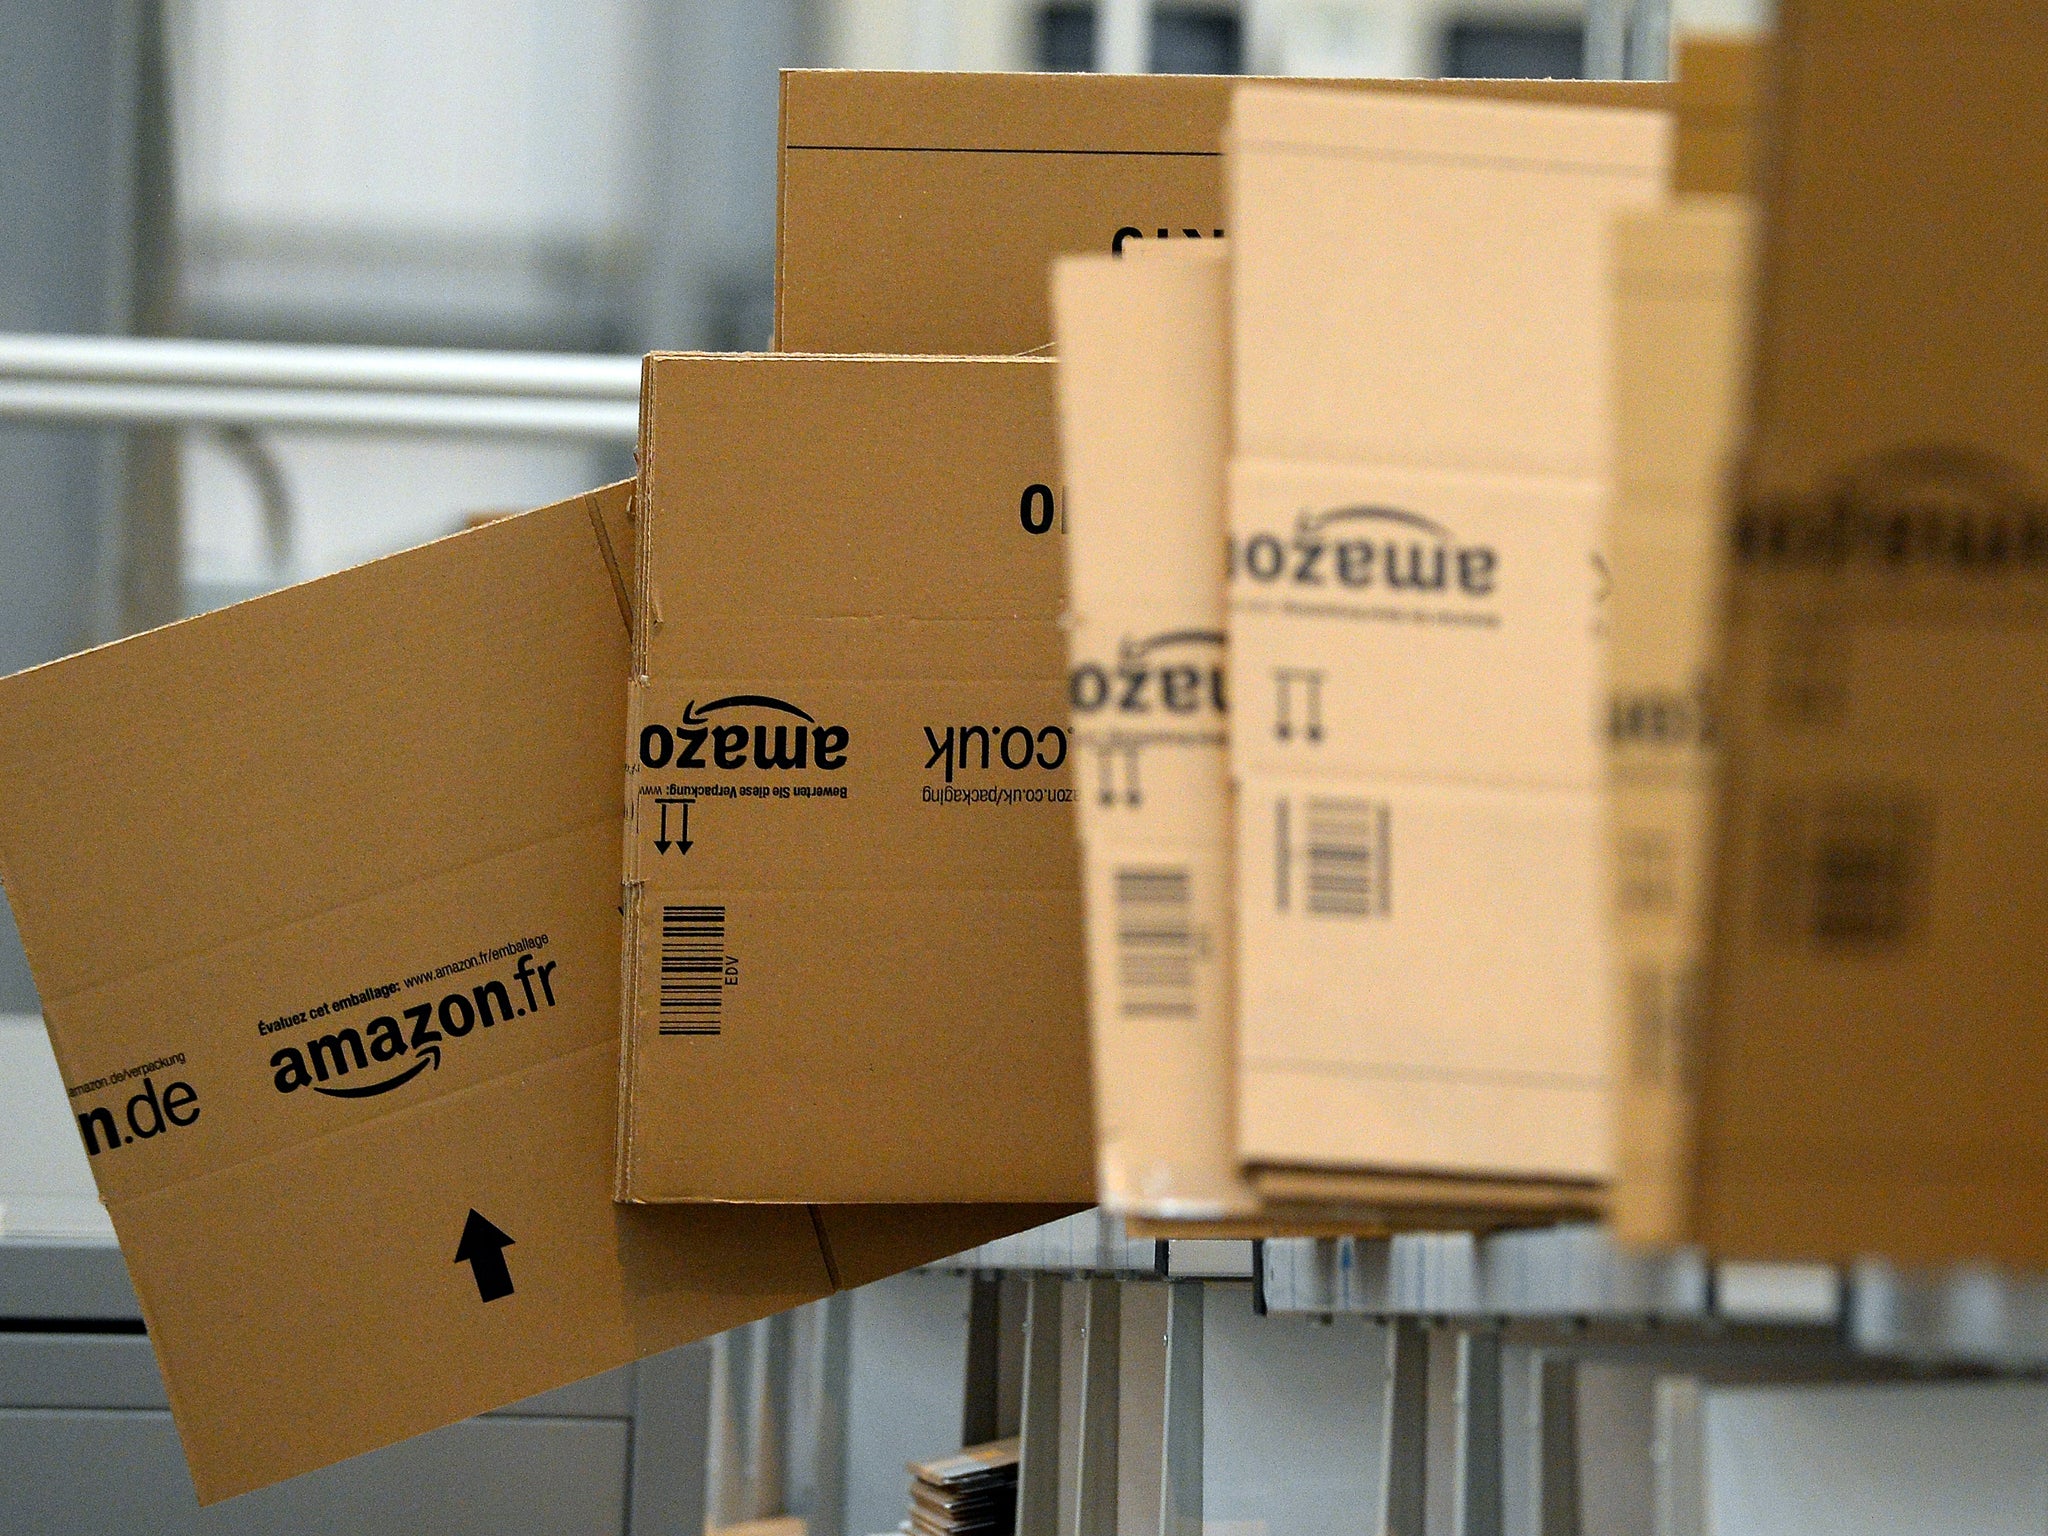 Empty boxes are stacked in the packaging department at the Fulfilment Centre for online retail giant Amazon in Peterborough